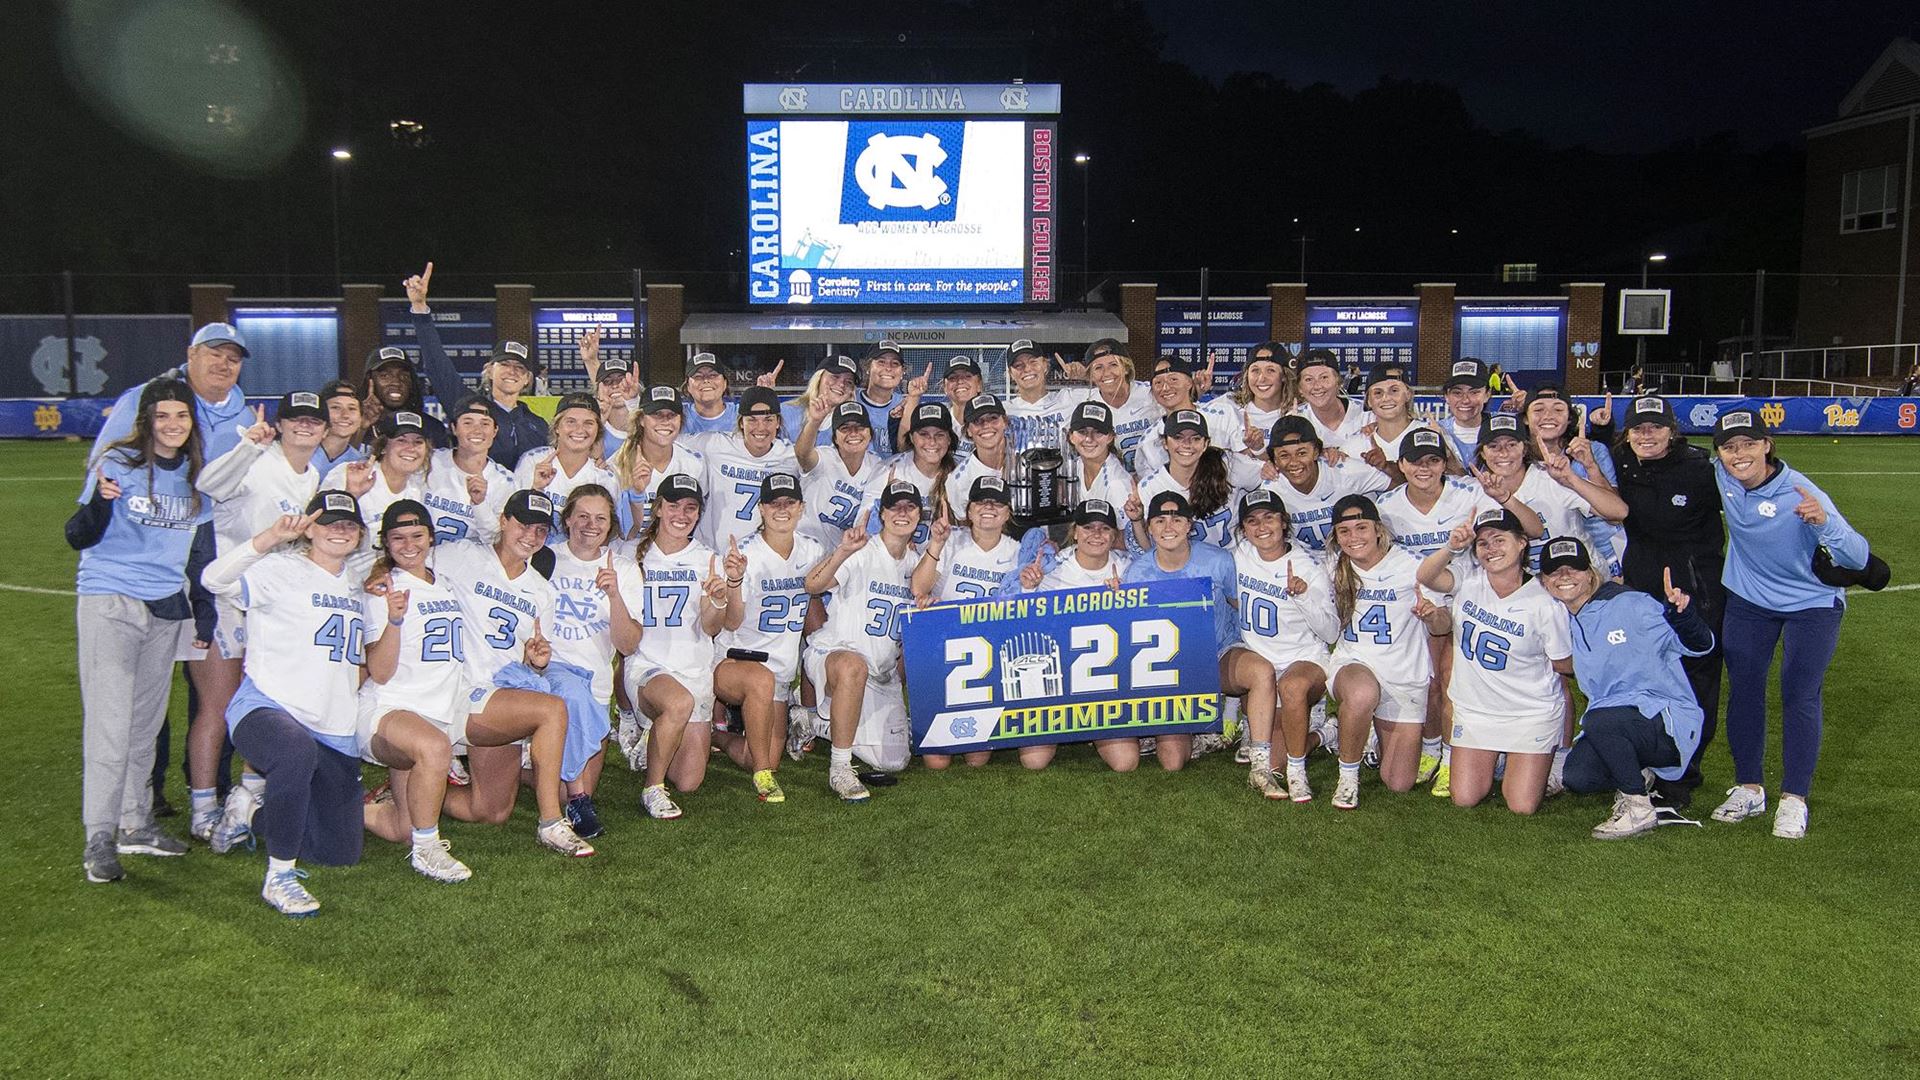 Women's lacrosse team poses with an ACC Championship sign